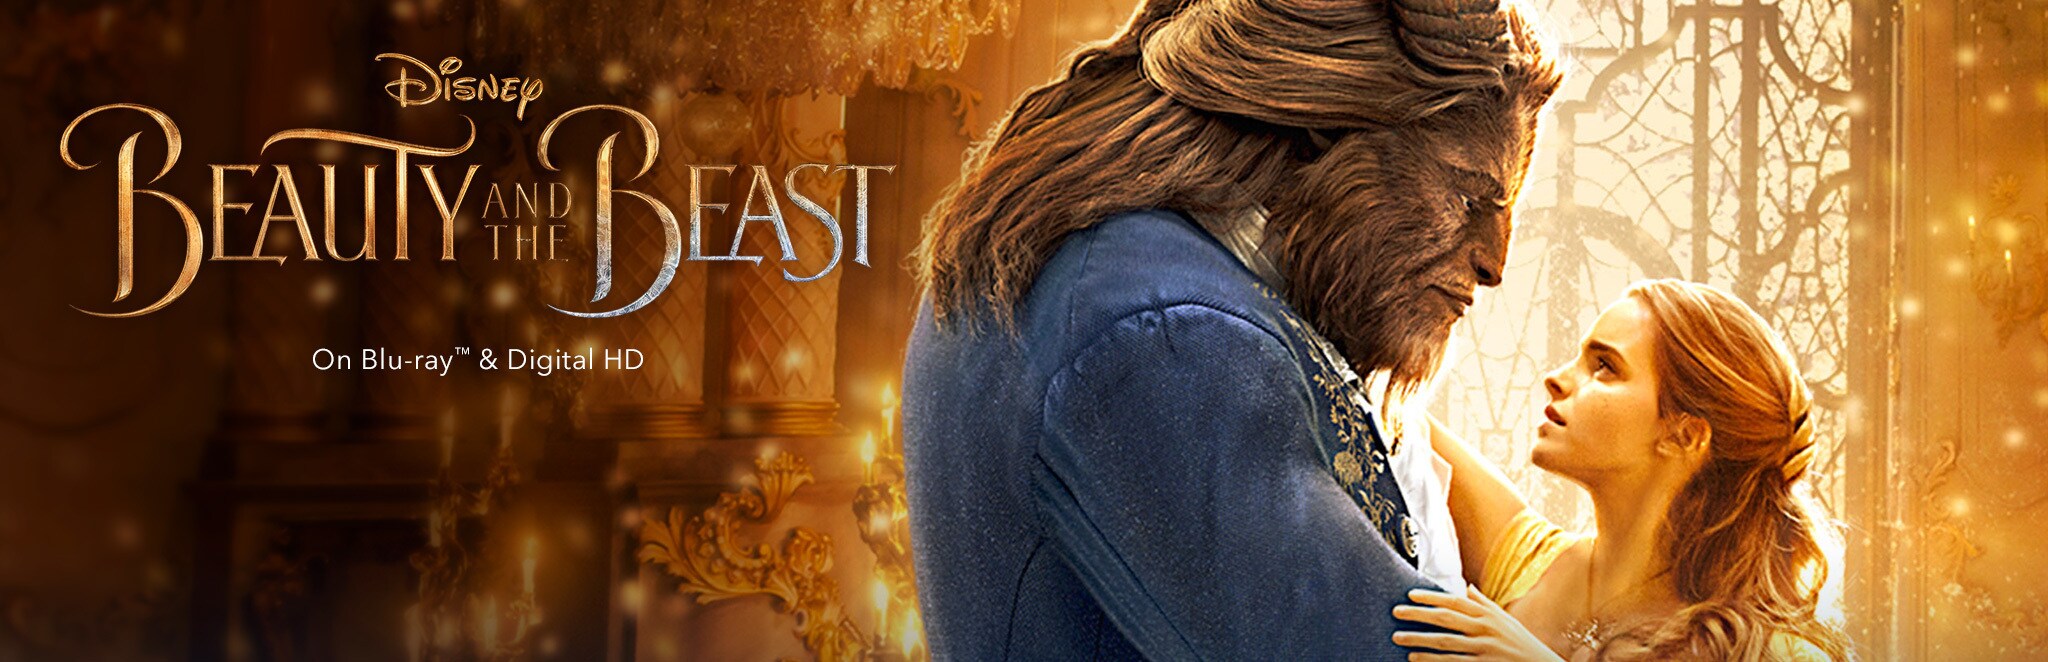 Beauty and the Beast | Disney Movies